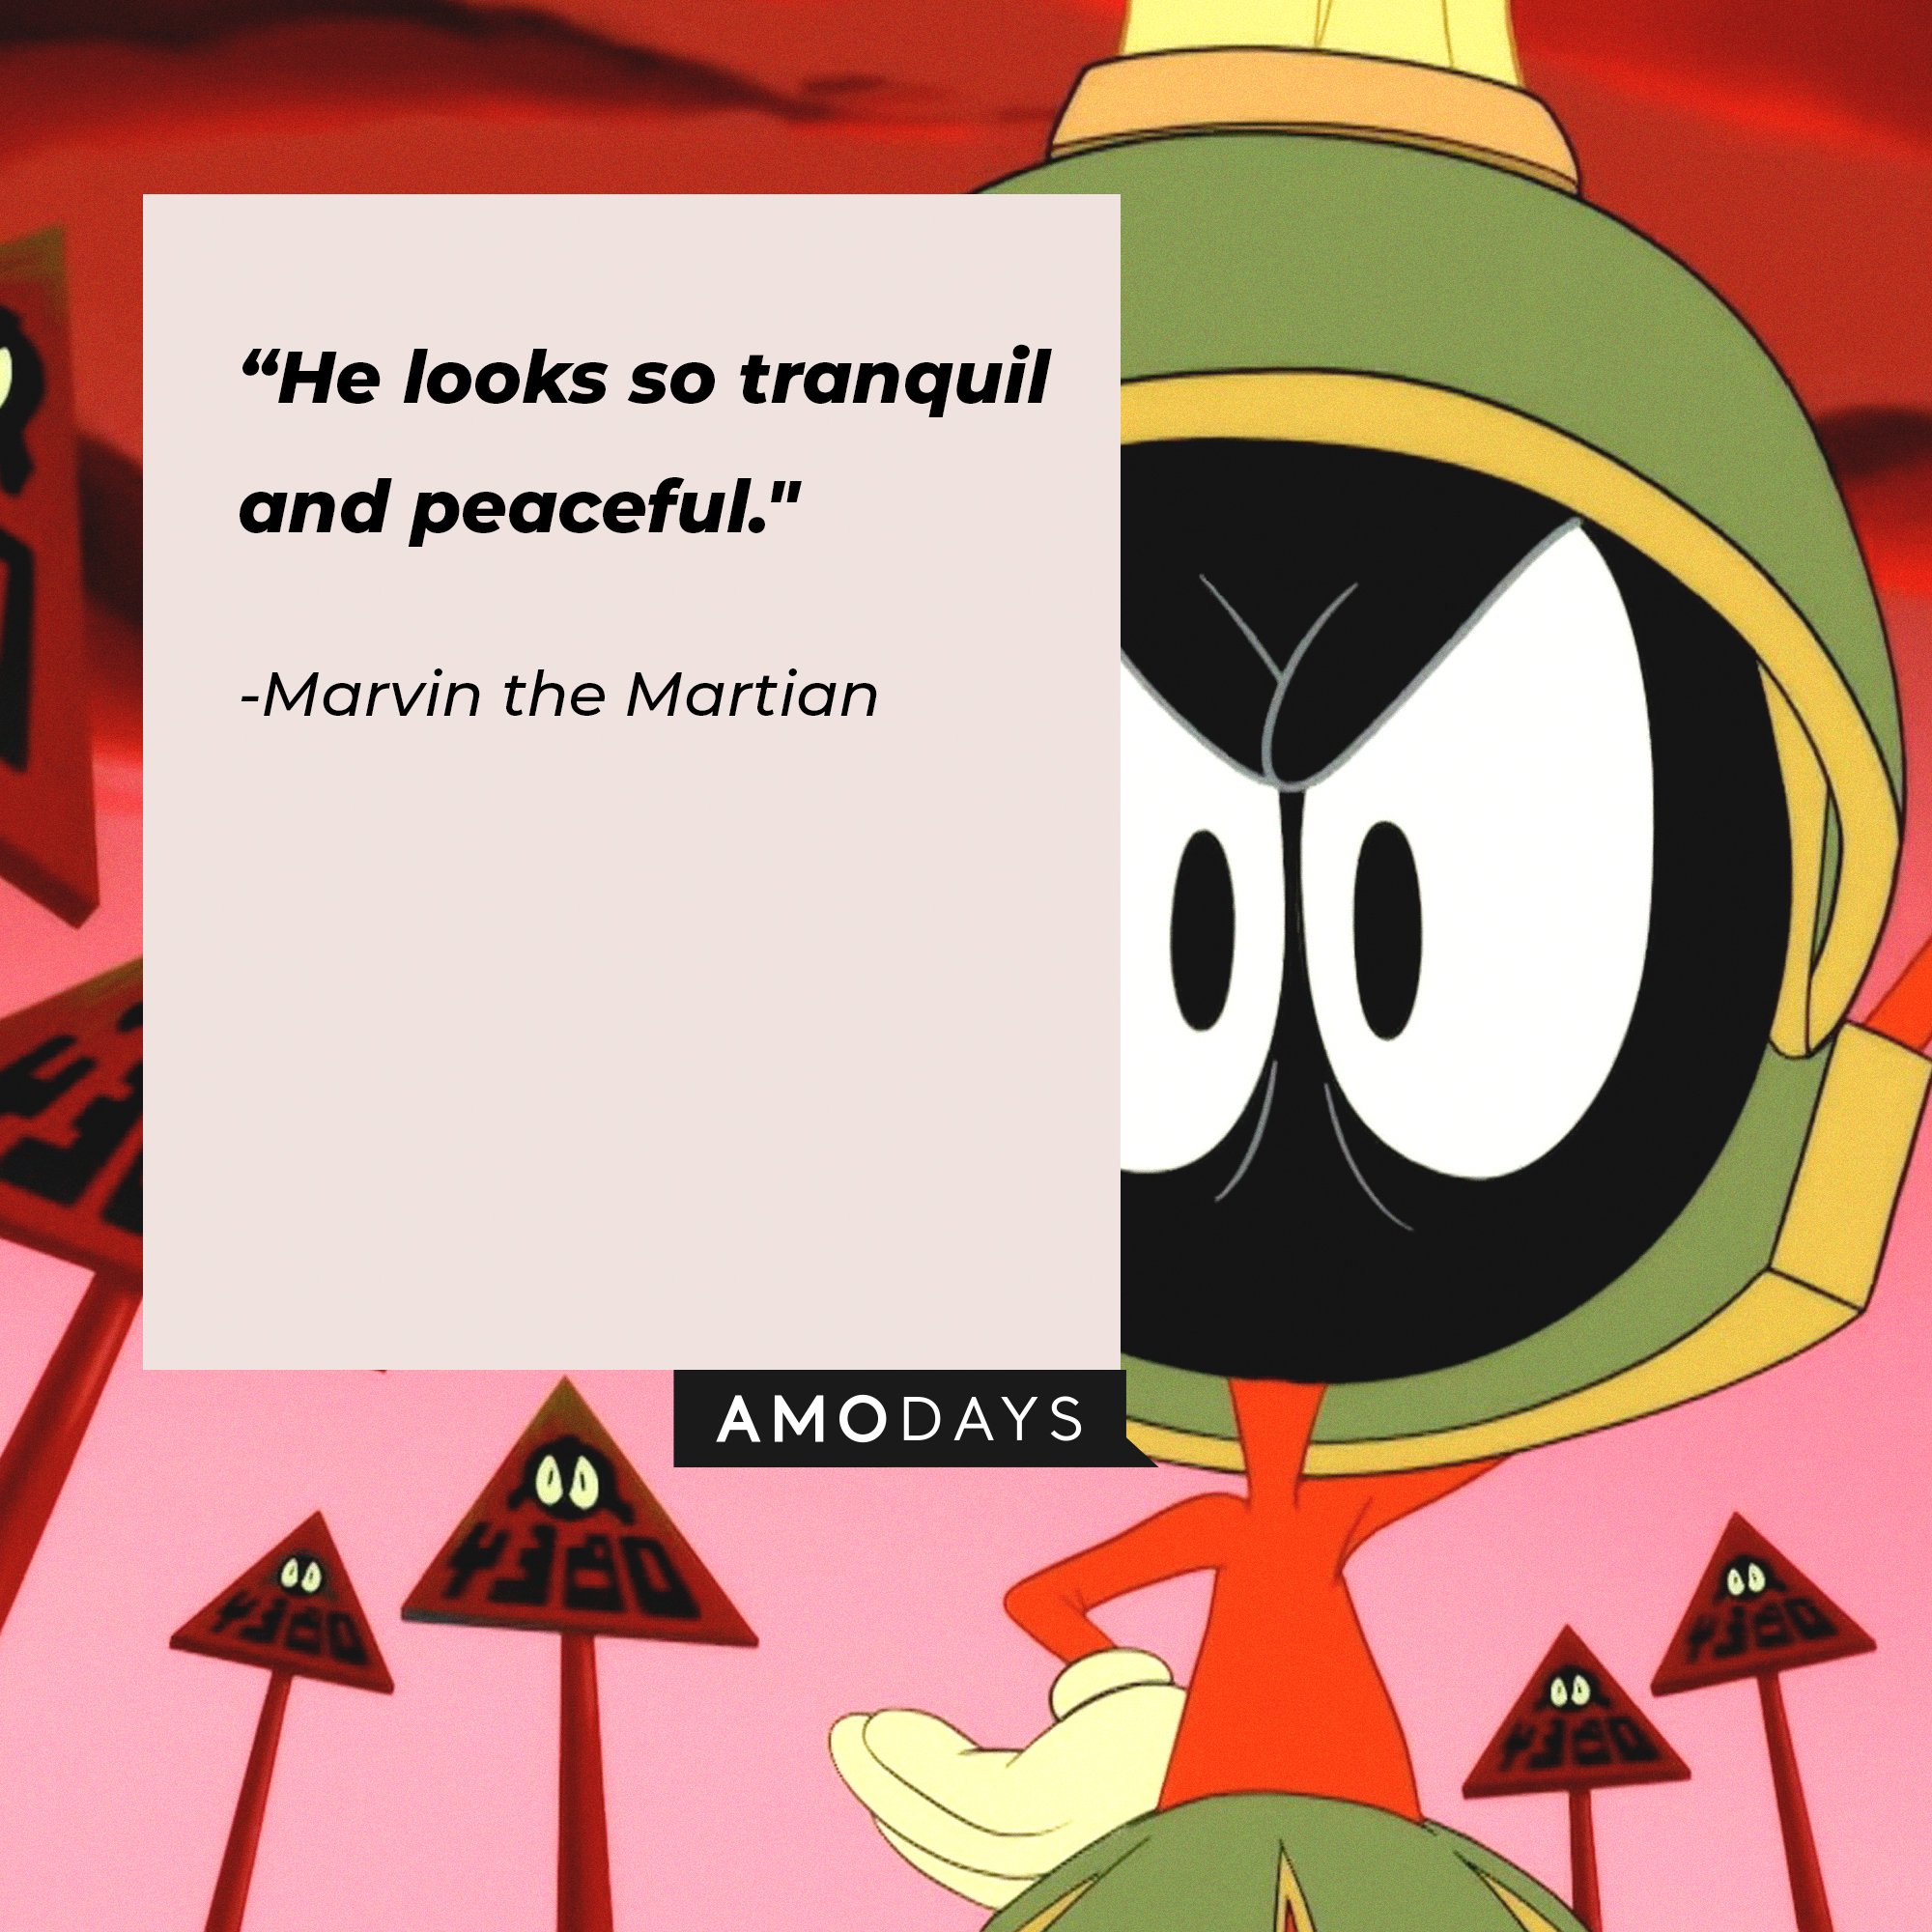 Marvin the Martian’s quote: "He looks so tranquil and peaceful." | Image: AmoDays